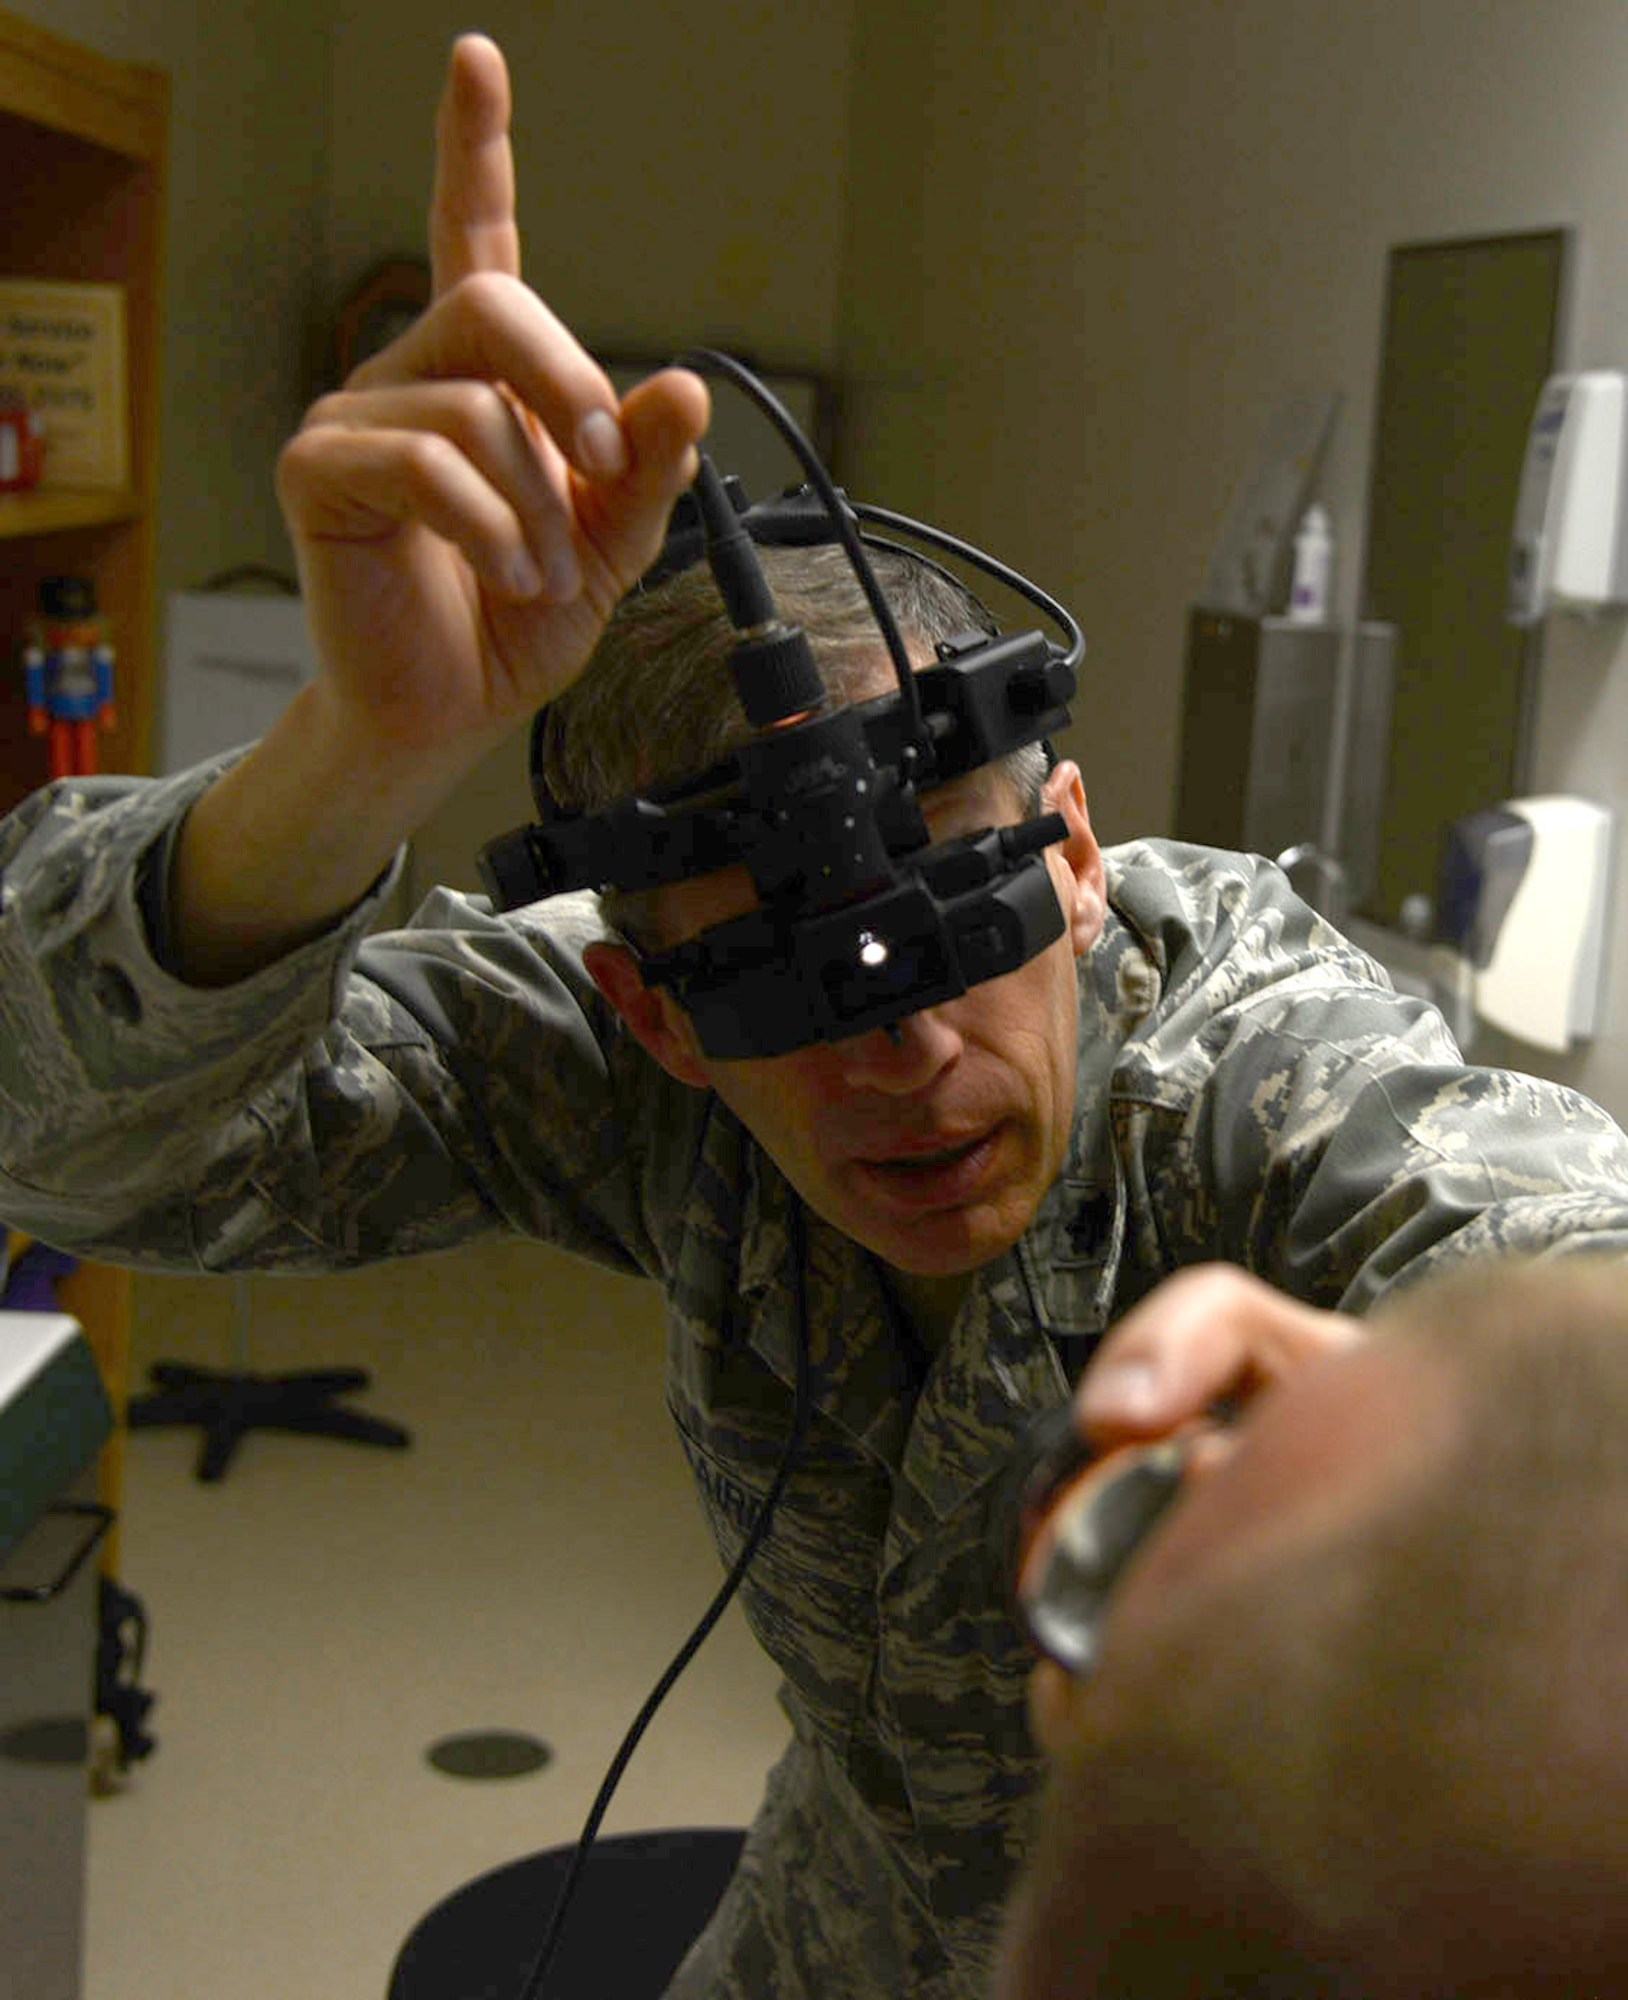 Dr. (Lt. Col.) Richard Baird, an optometrist with the 412th Medical Group, examines a patients eyes. Baird was recently selected as both the Air Force Optometrist of the Year as well as the Armed Forces Optometrist of the Year. (U.S. Air Force photo by Christopher Ball)